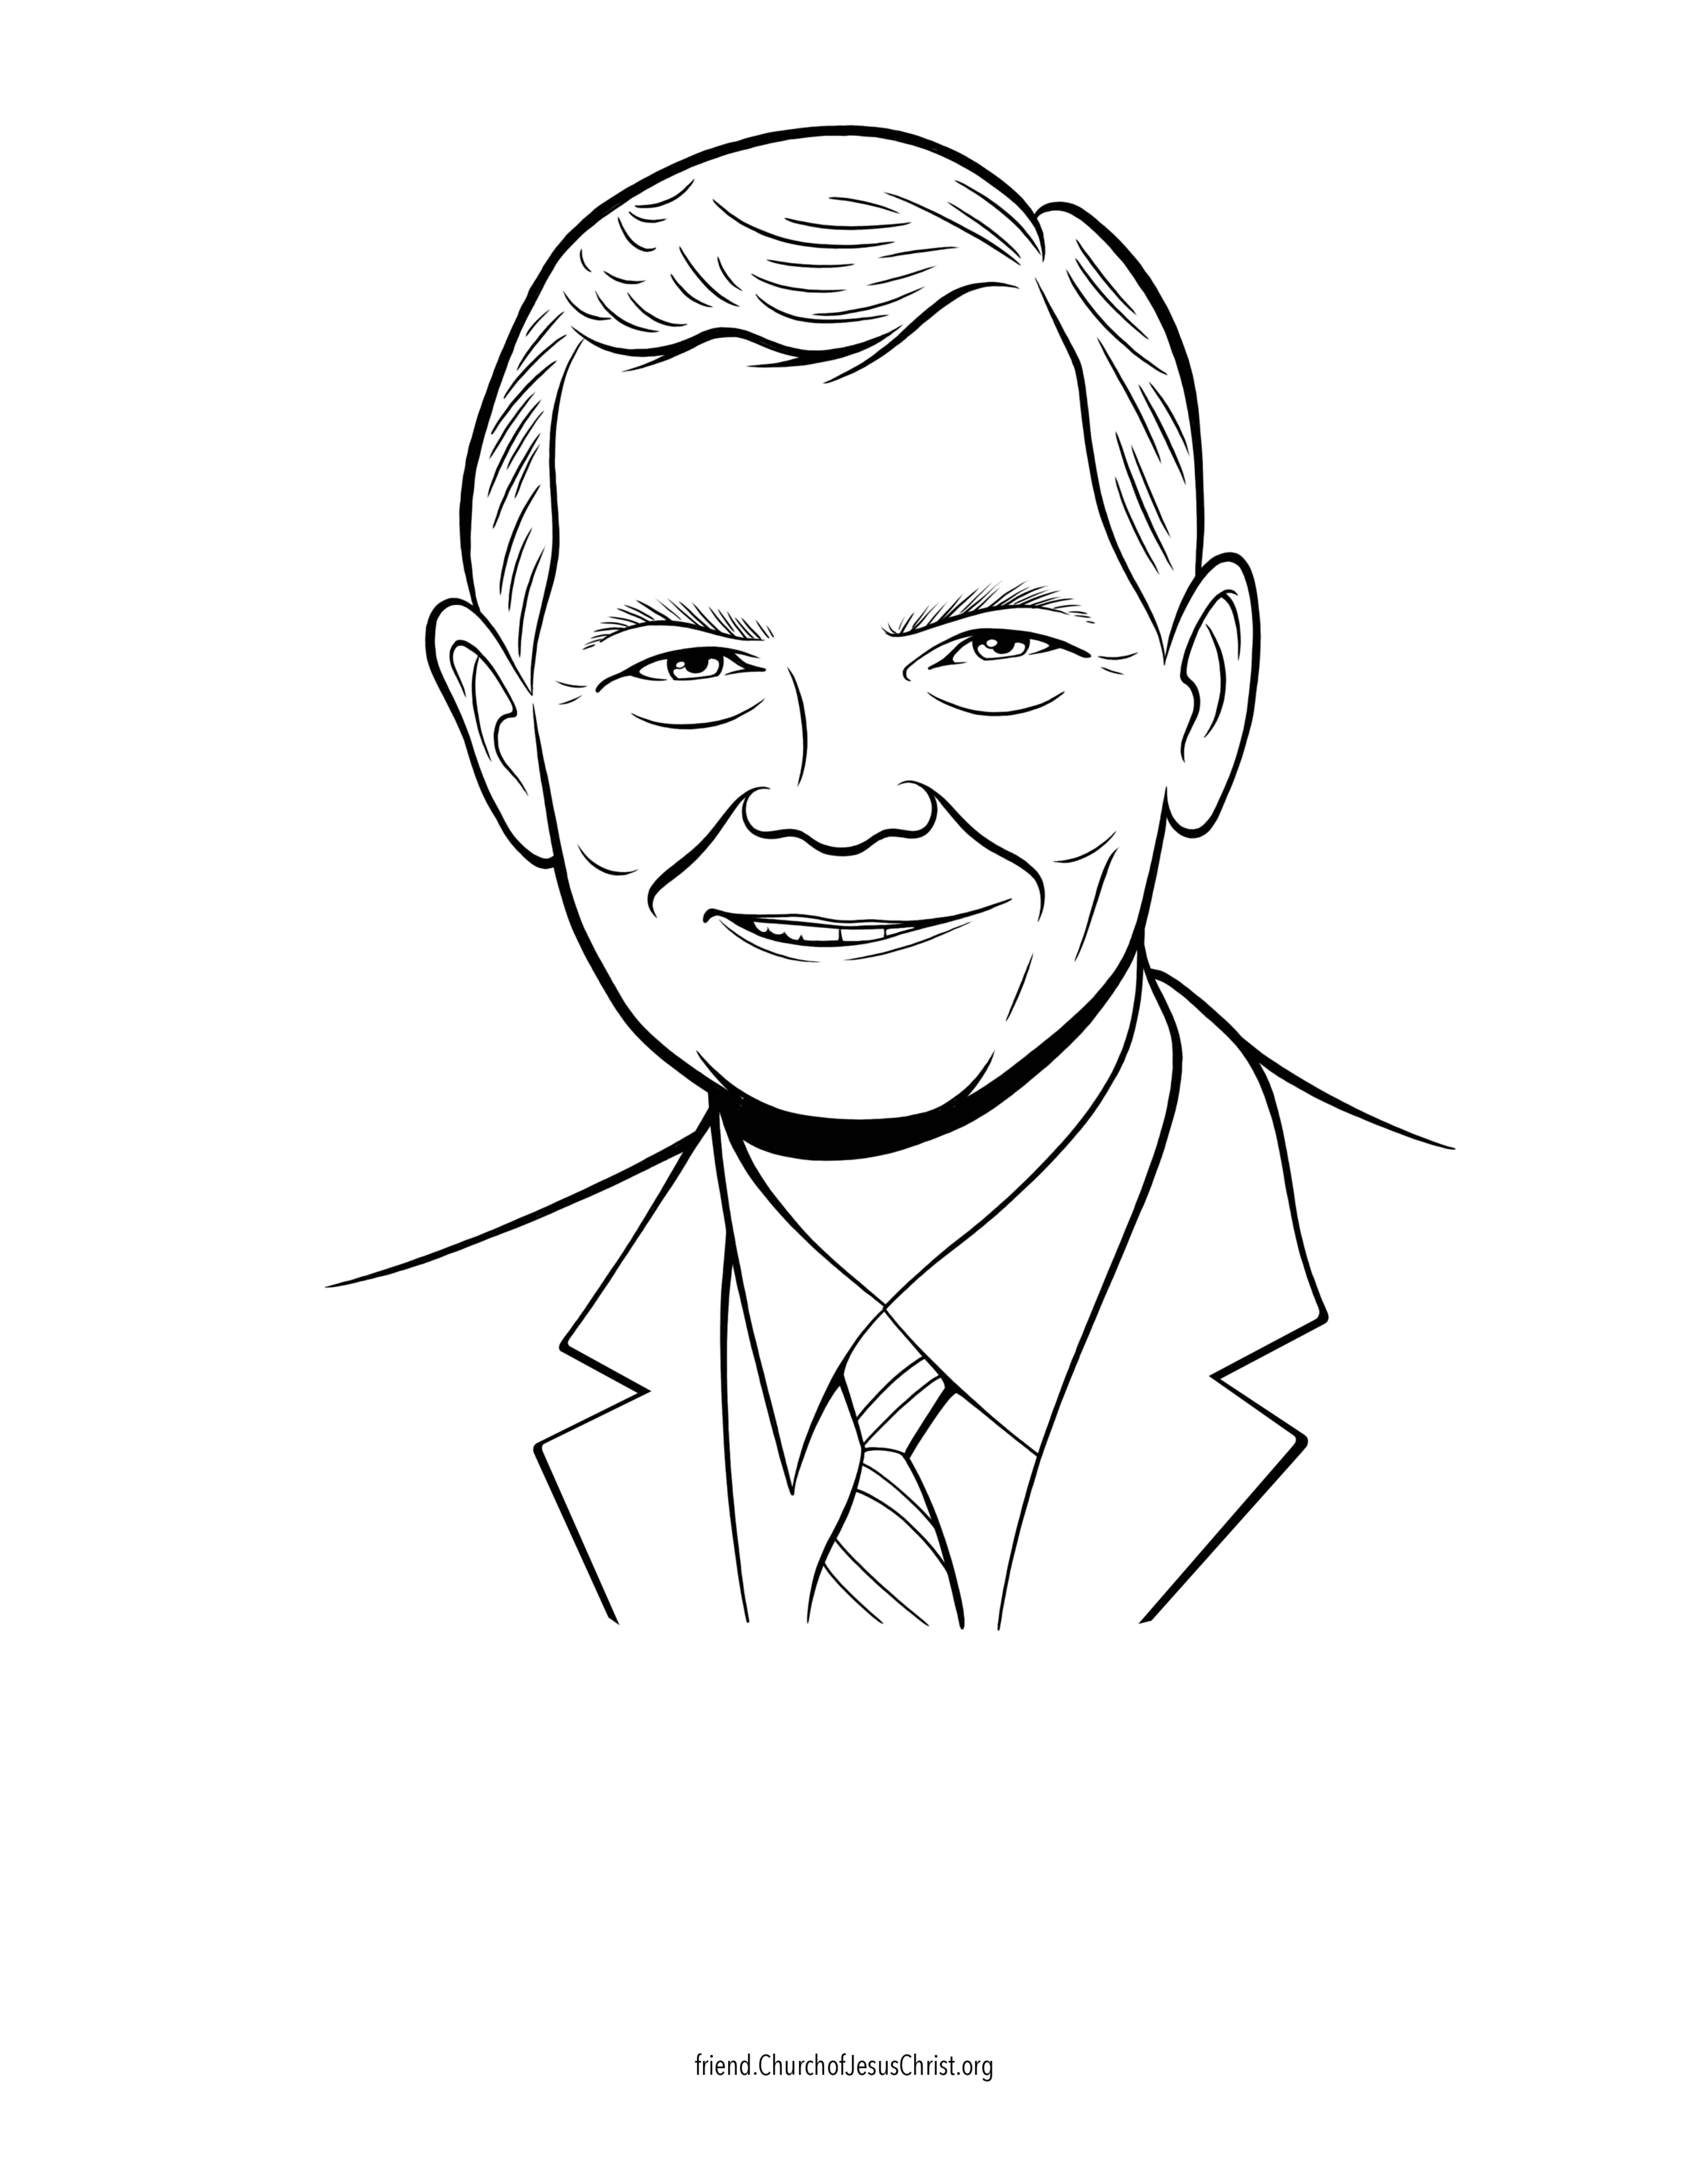 A coloring page of the official portrait of Gary E. Stevenson.